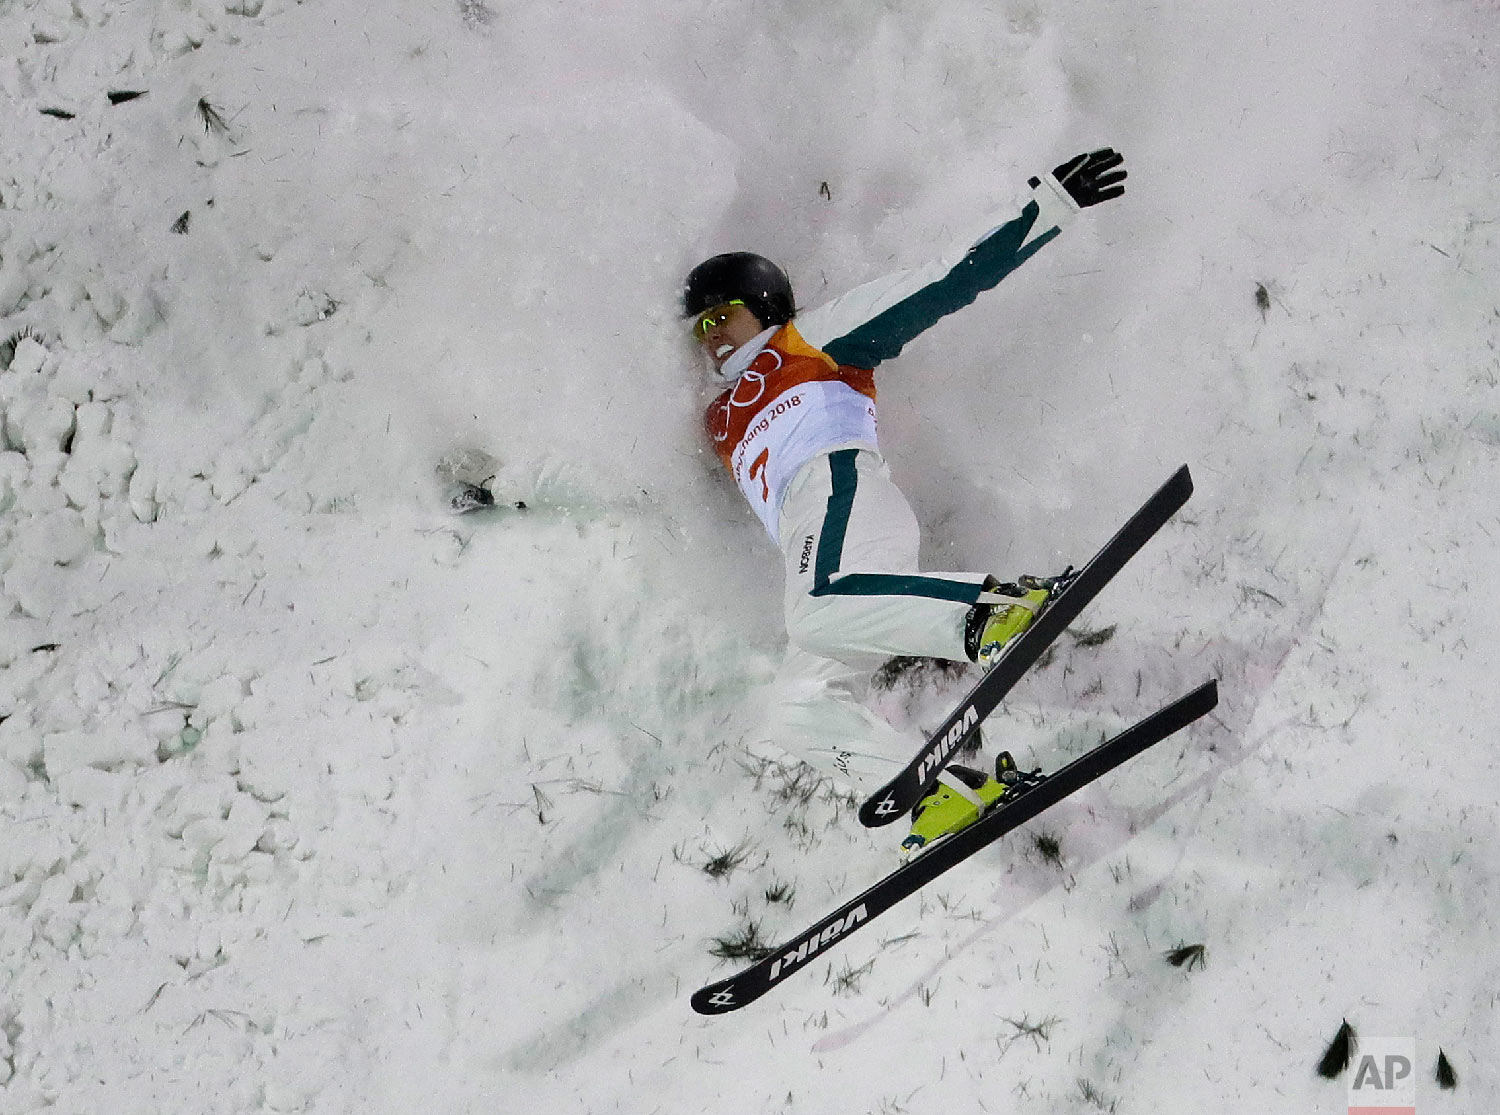  Laura Peel, of Australia, crashes during the women's freestyle aerial final at Phoenix Snow Park at the 2018 Winter Olympics in Pyeongchang, South Korea, Friday, Feb. 16, 2018. (AP Photo/Lee Jin-man) 